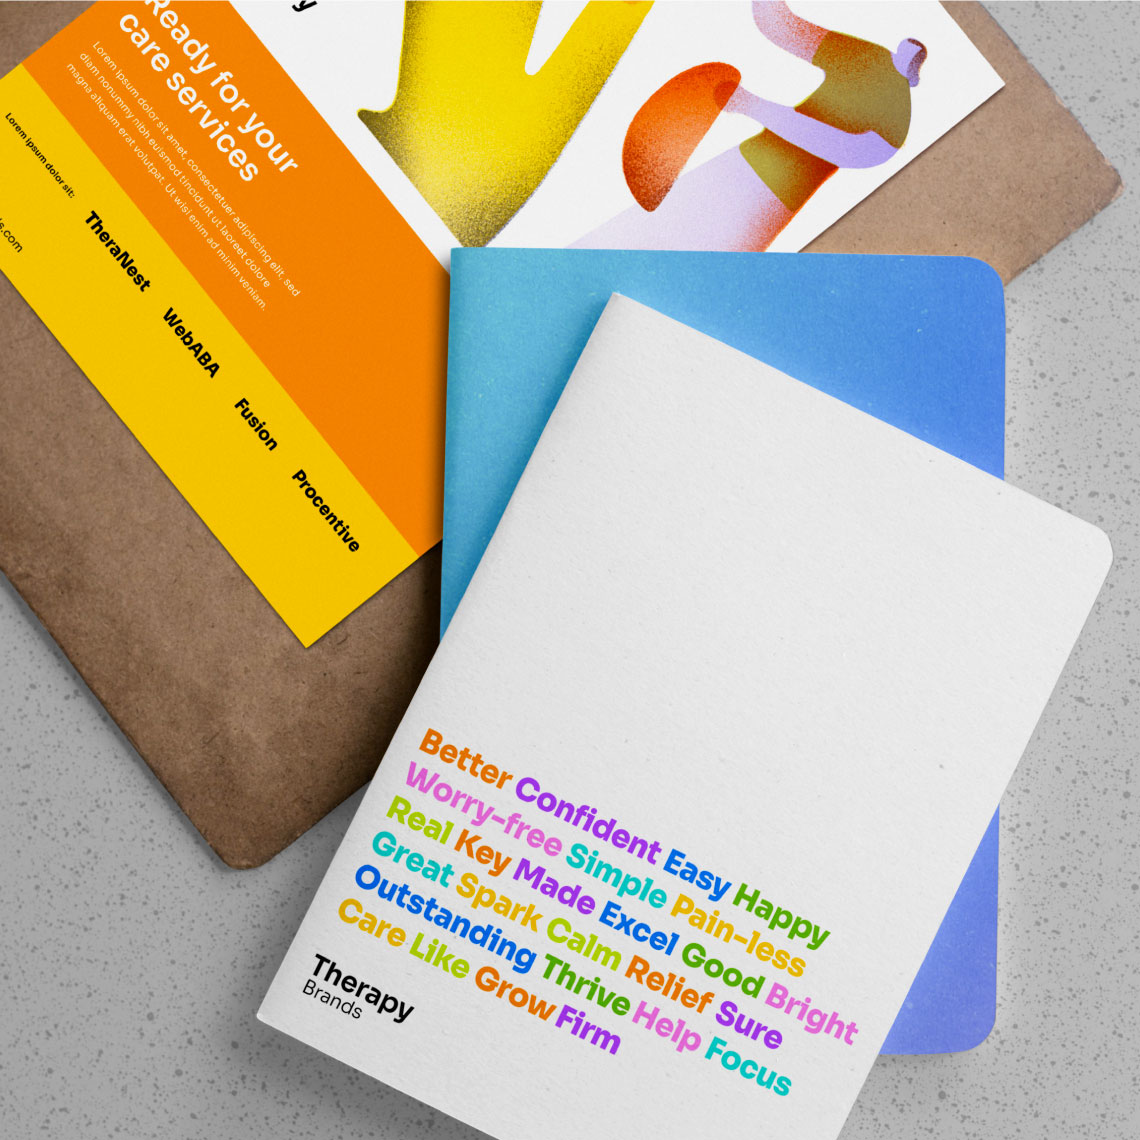 Different examples of the design system applied in printed banners and corporate folders